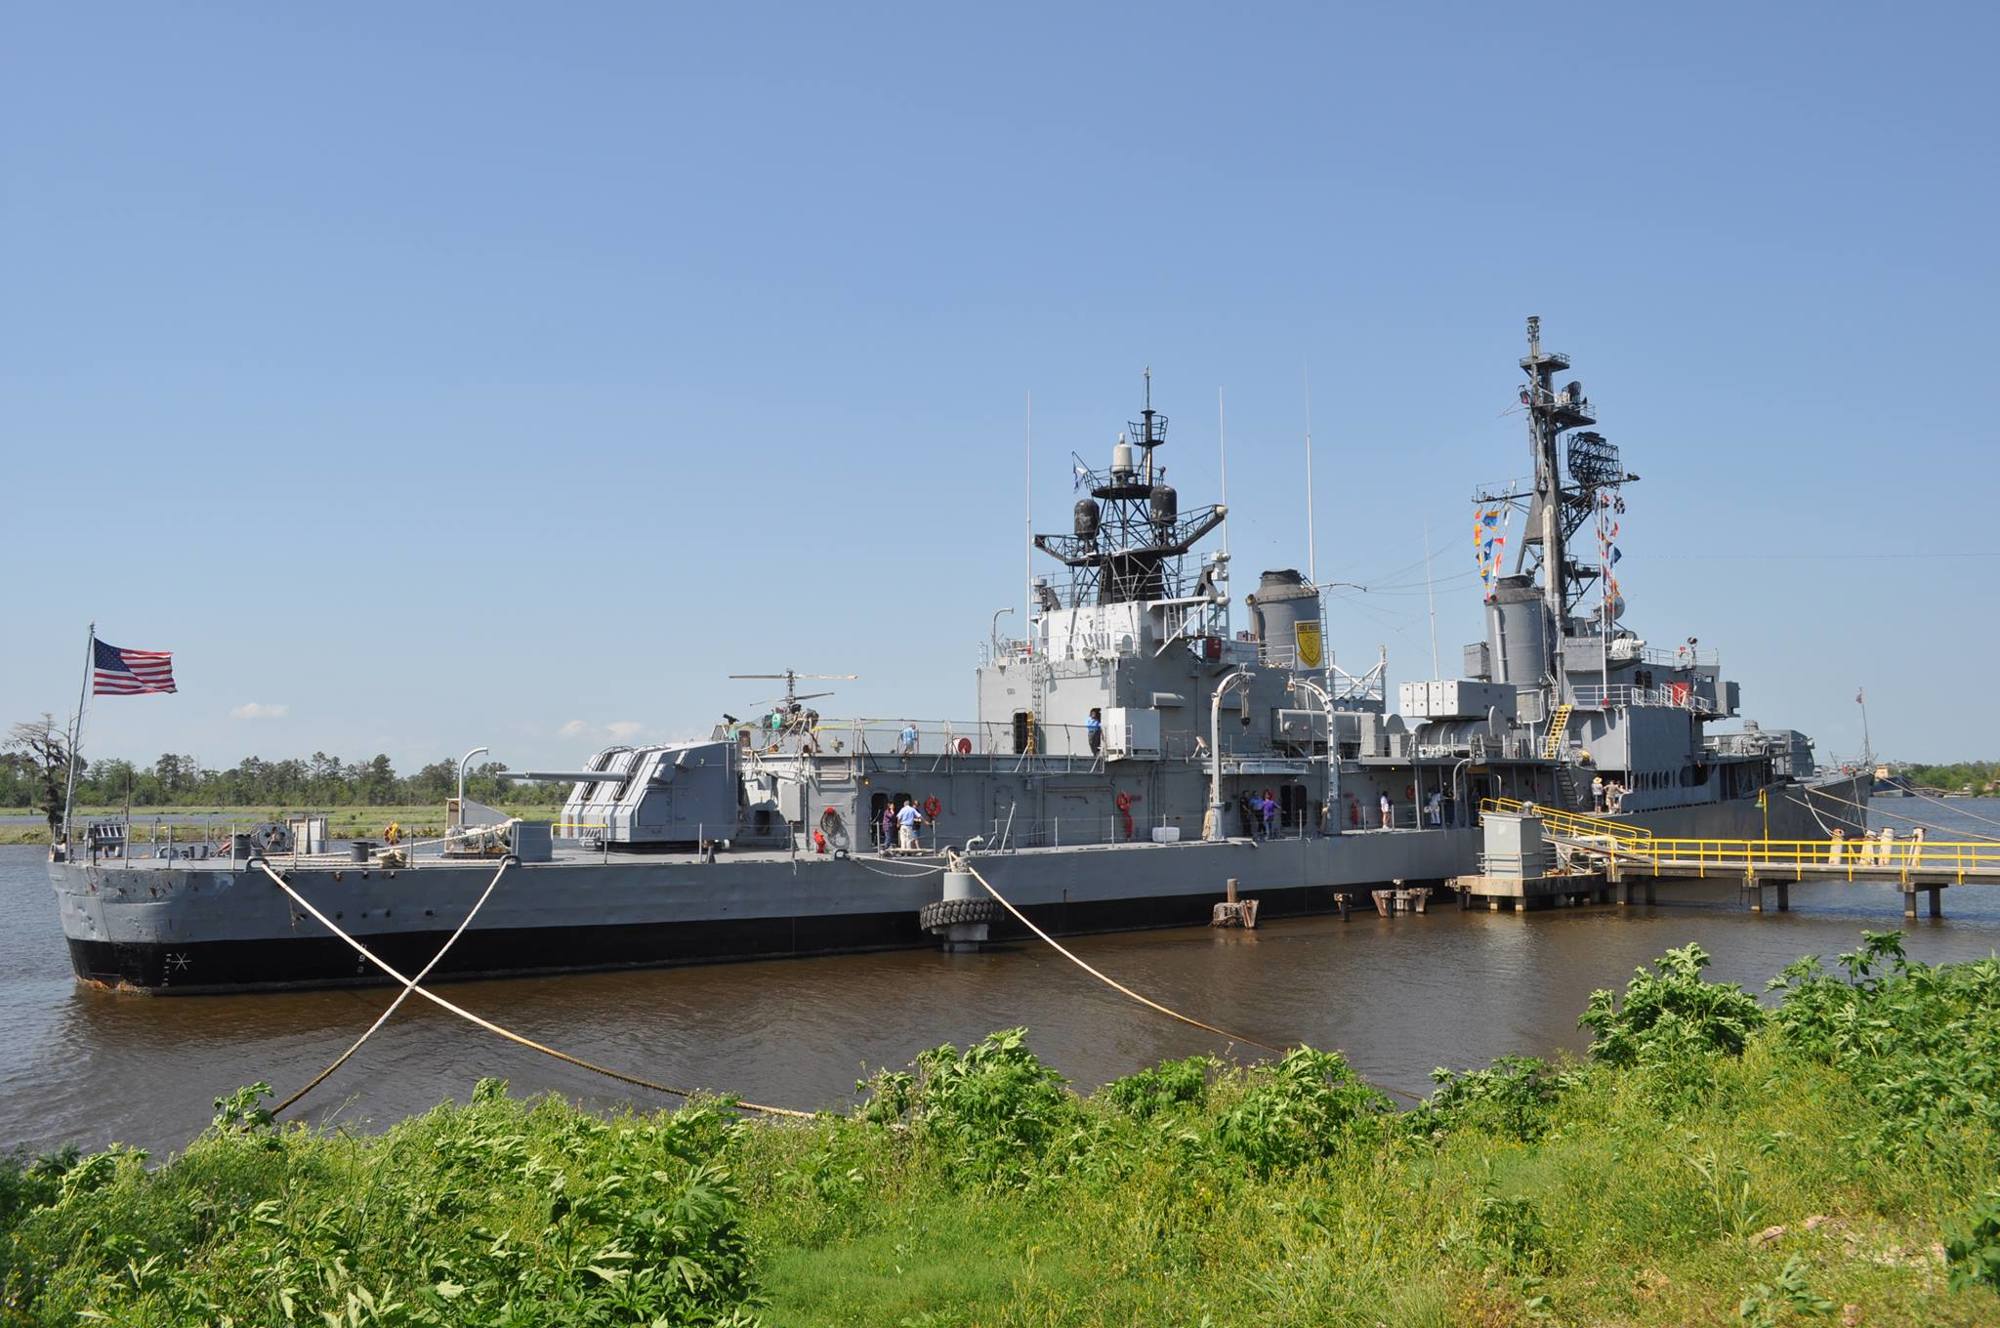 The USS Orleck has been a working museum in Lake Charles, Louisiana, for the past 10 years.